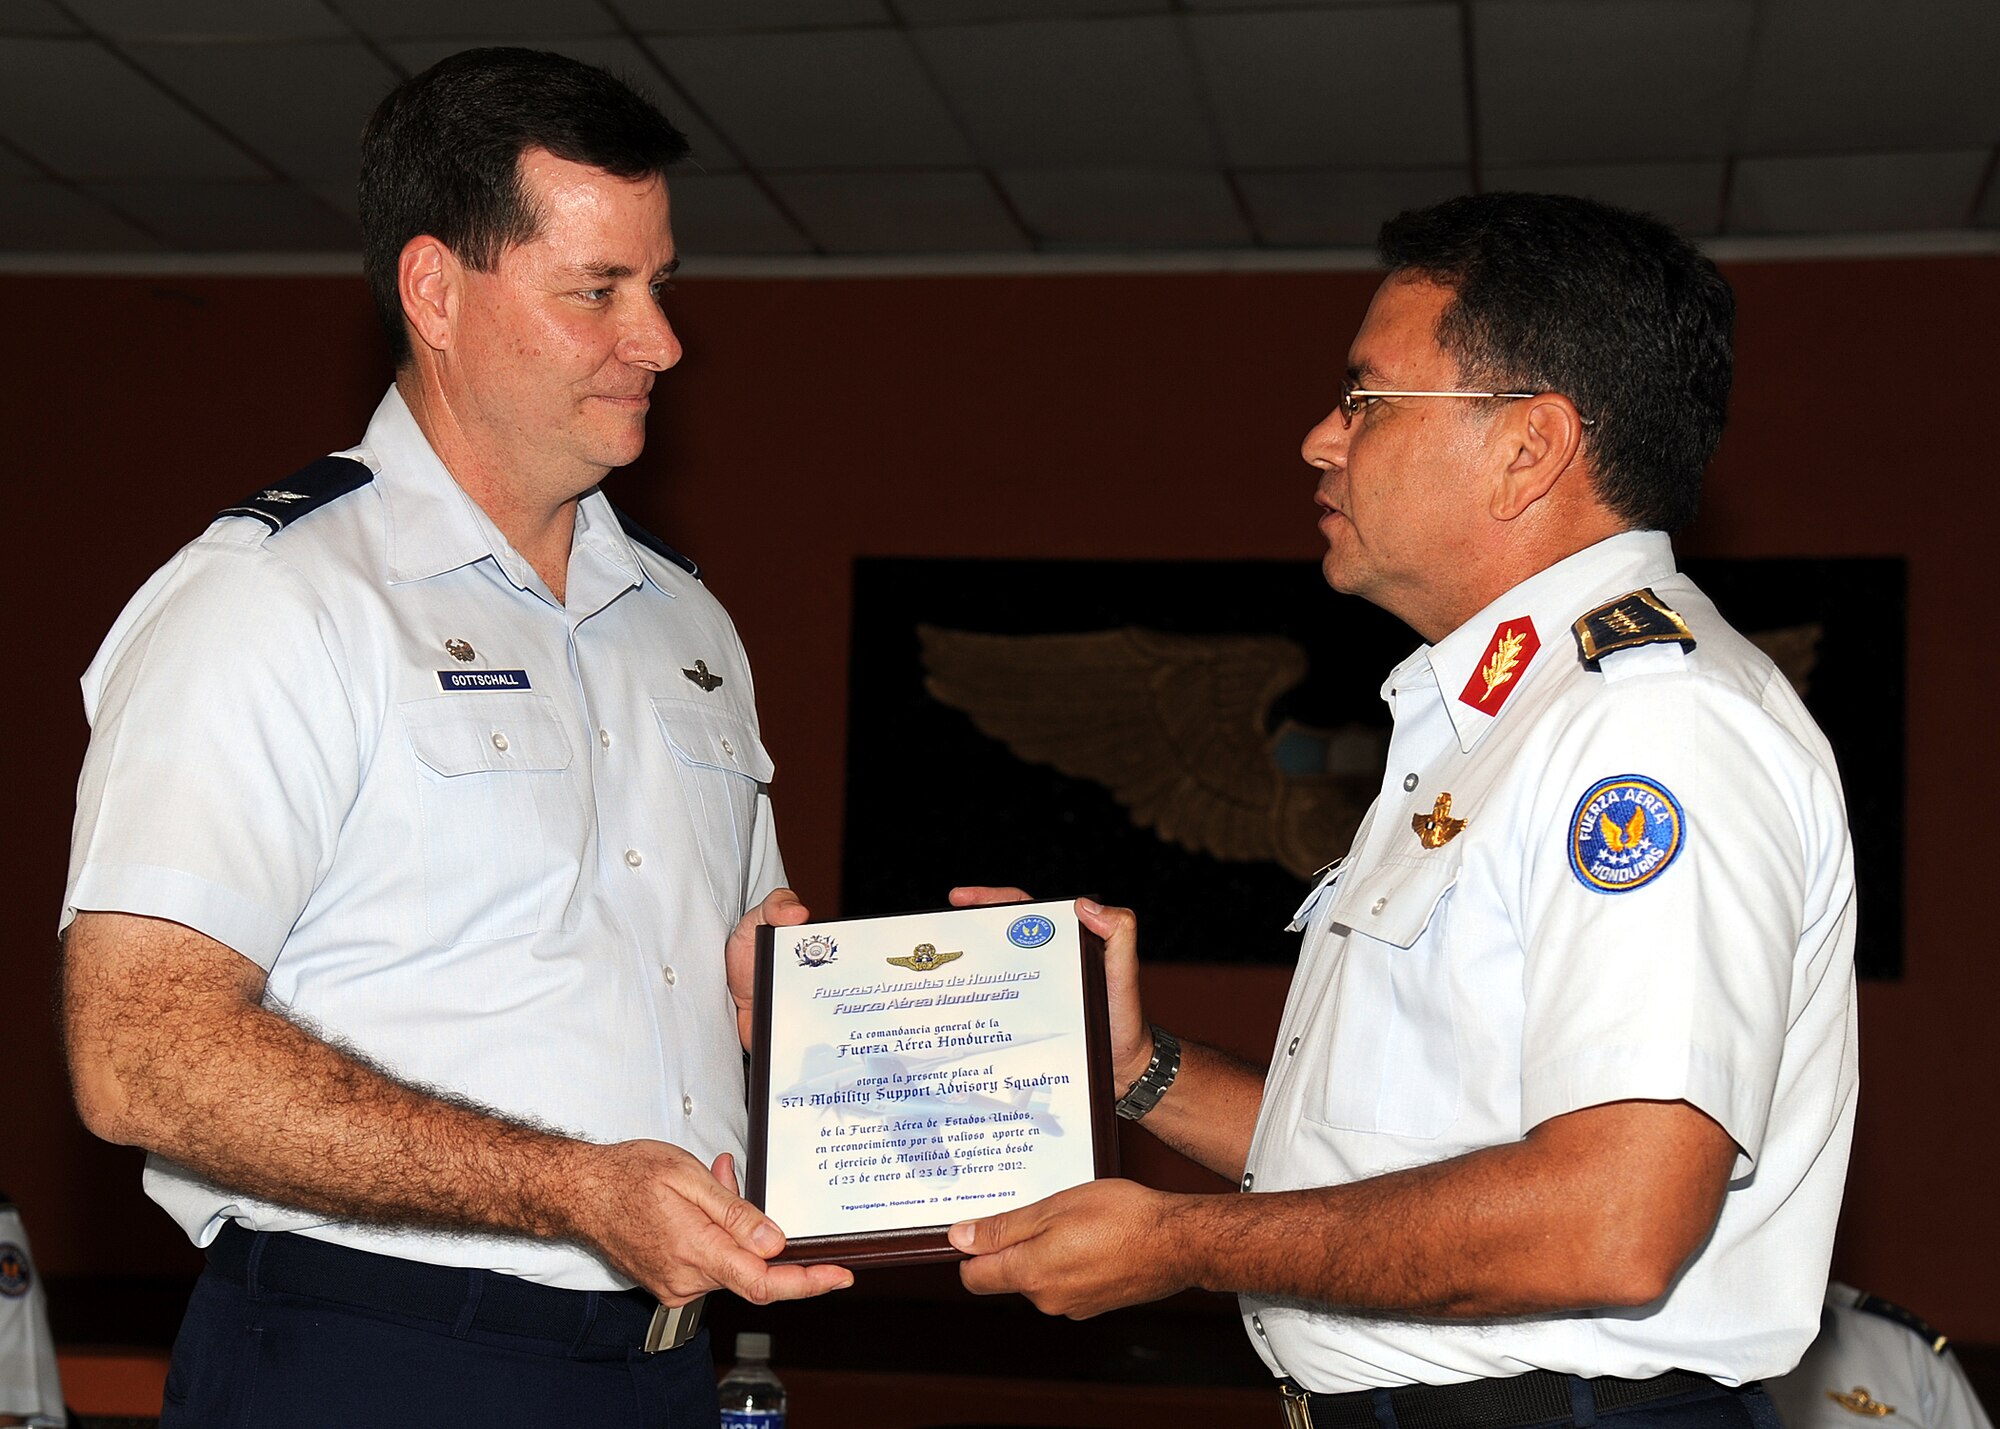 Brigadier Gen. Ruiz Pastor Landa Dubón, Honduran air force commanding general, presents Colonel Gary Gottschall, 615th Contingency Response Wing commander, a plaque and thanks him for the partnership between the two air forces during the closing ceremony in Tegucigalpa, Honduras, Feb. 23.  (U.S. Air Force photo by Tech. Sgt. Lesley Waters)